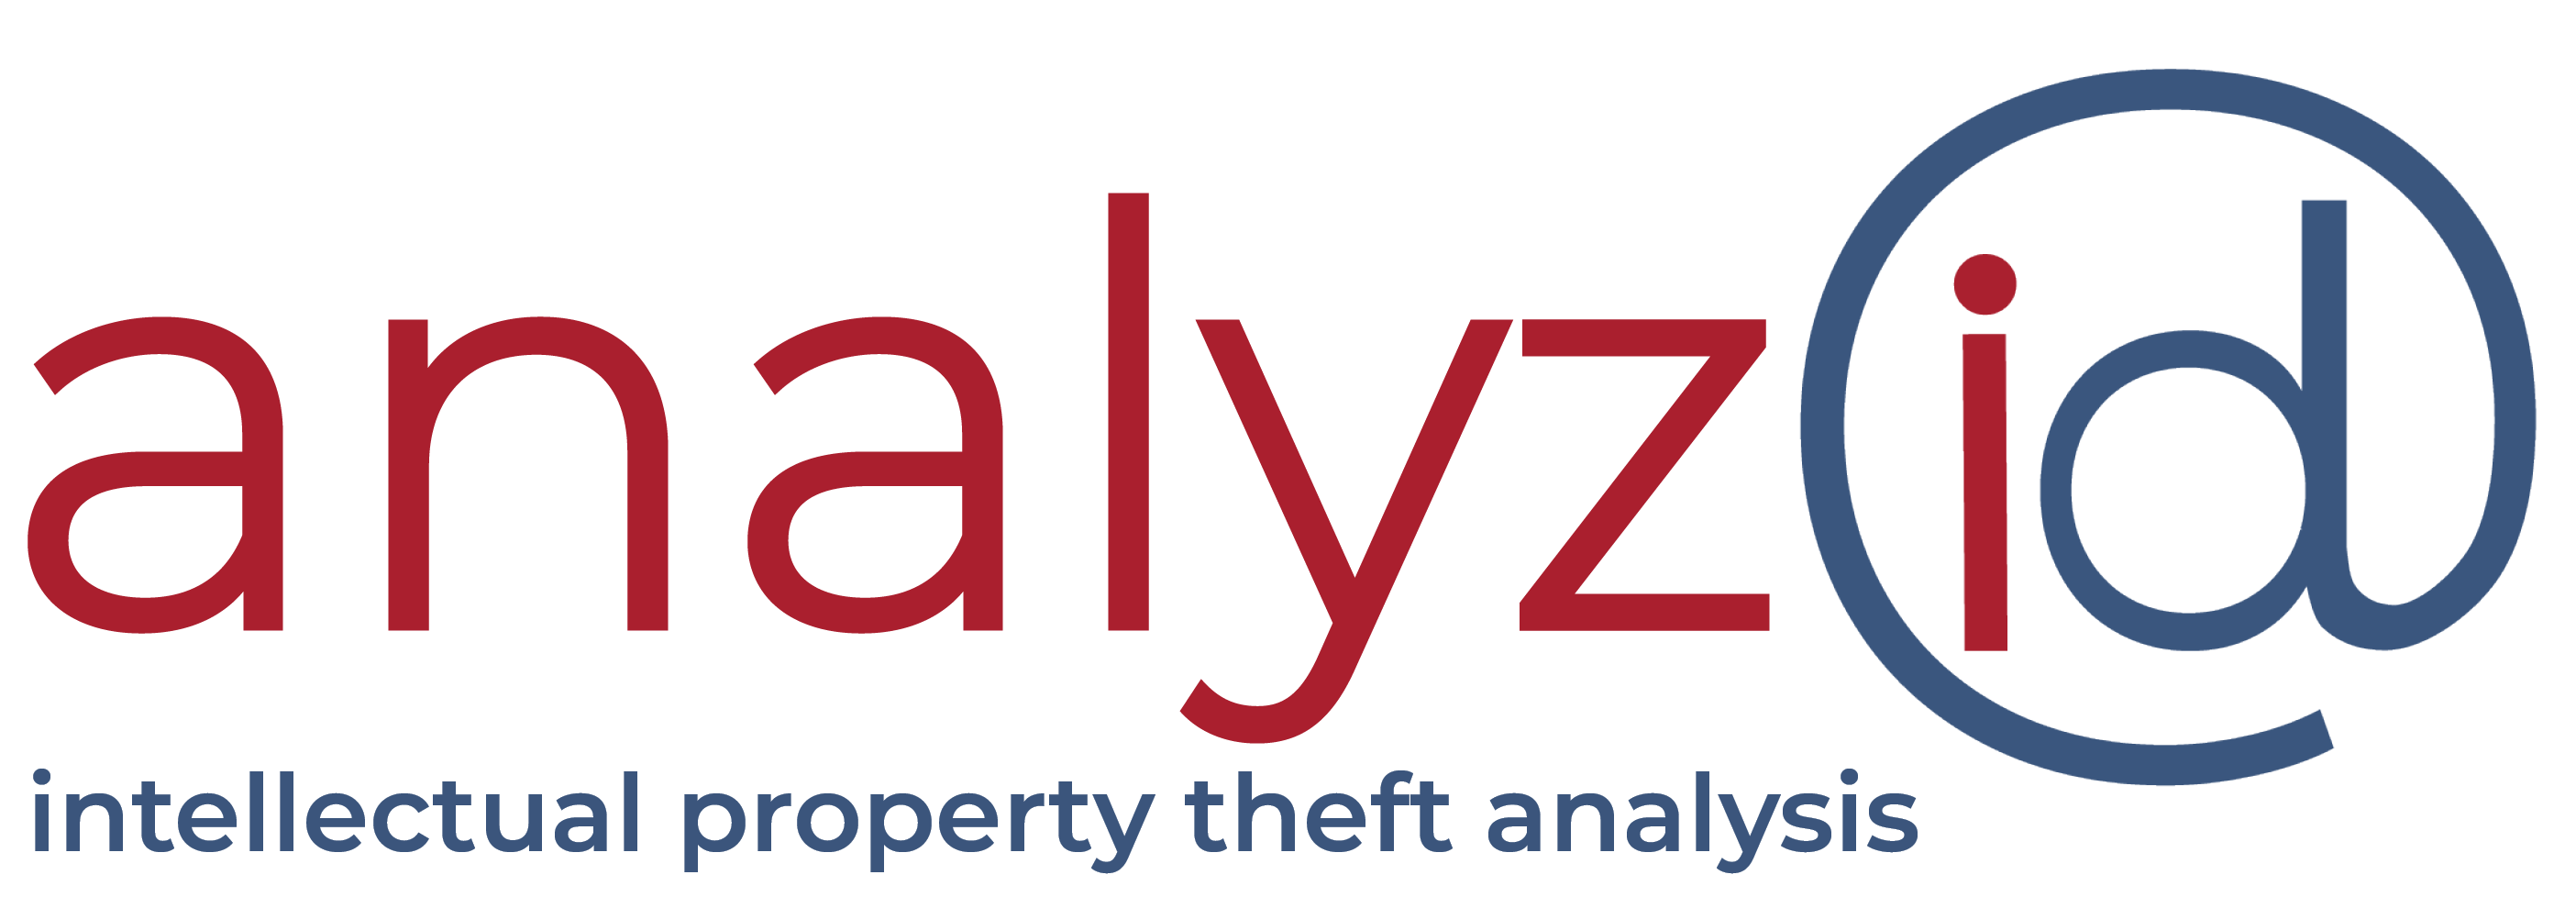 Innovative Discovery Introduces AnalyzID, an Intellectual Property Theft Detection Tool